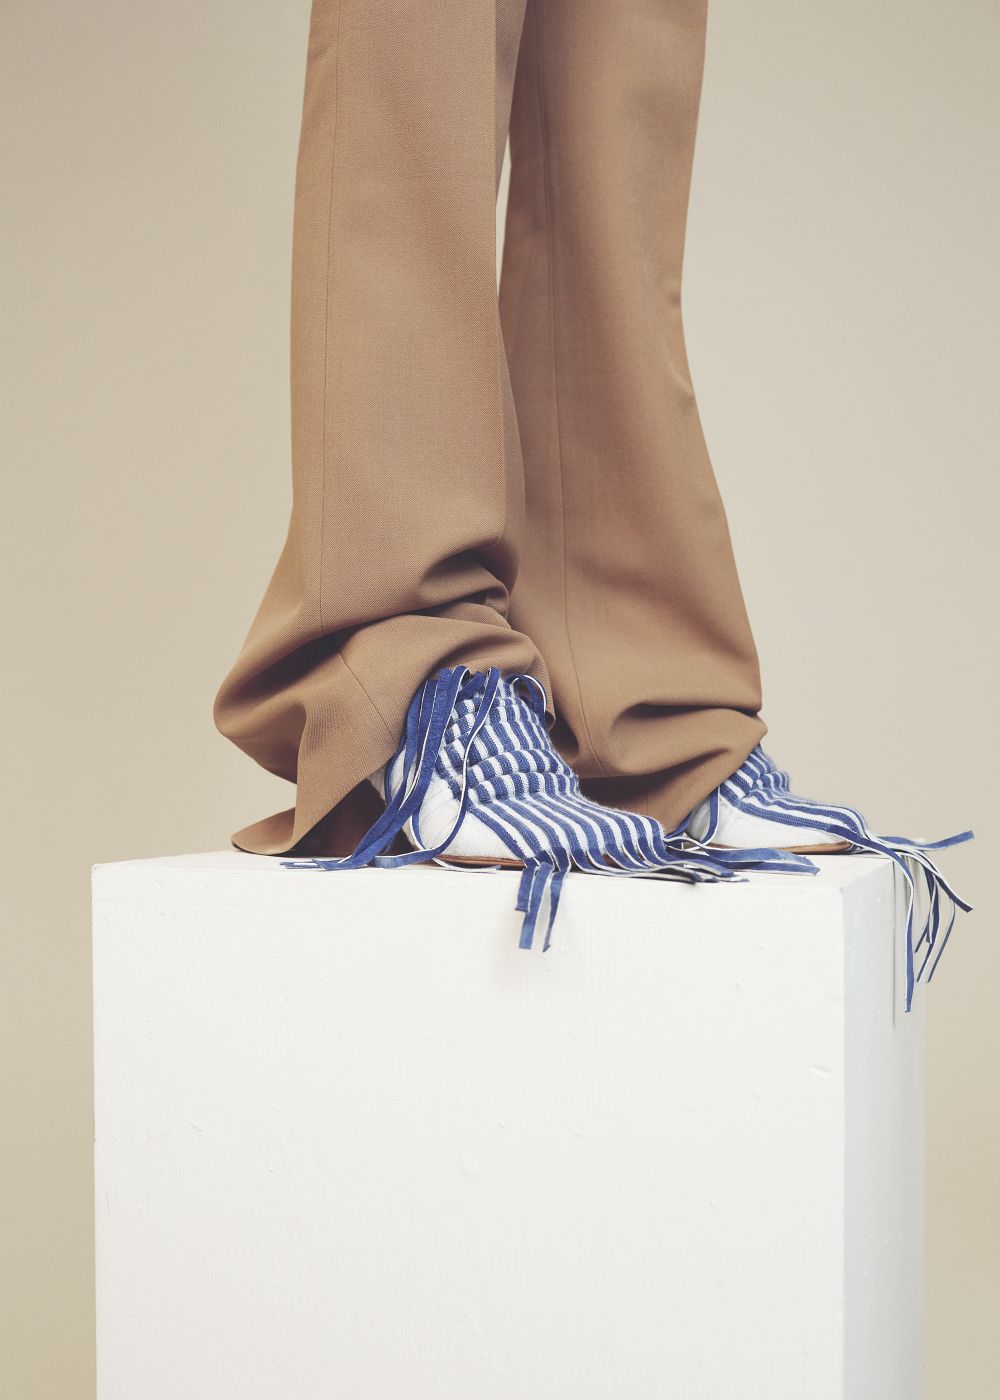 Tan baggy trousers worn with mid heel white and blue striped pointed shoe